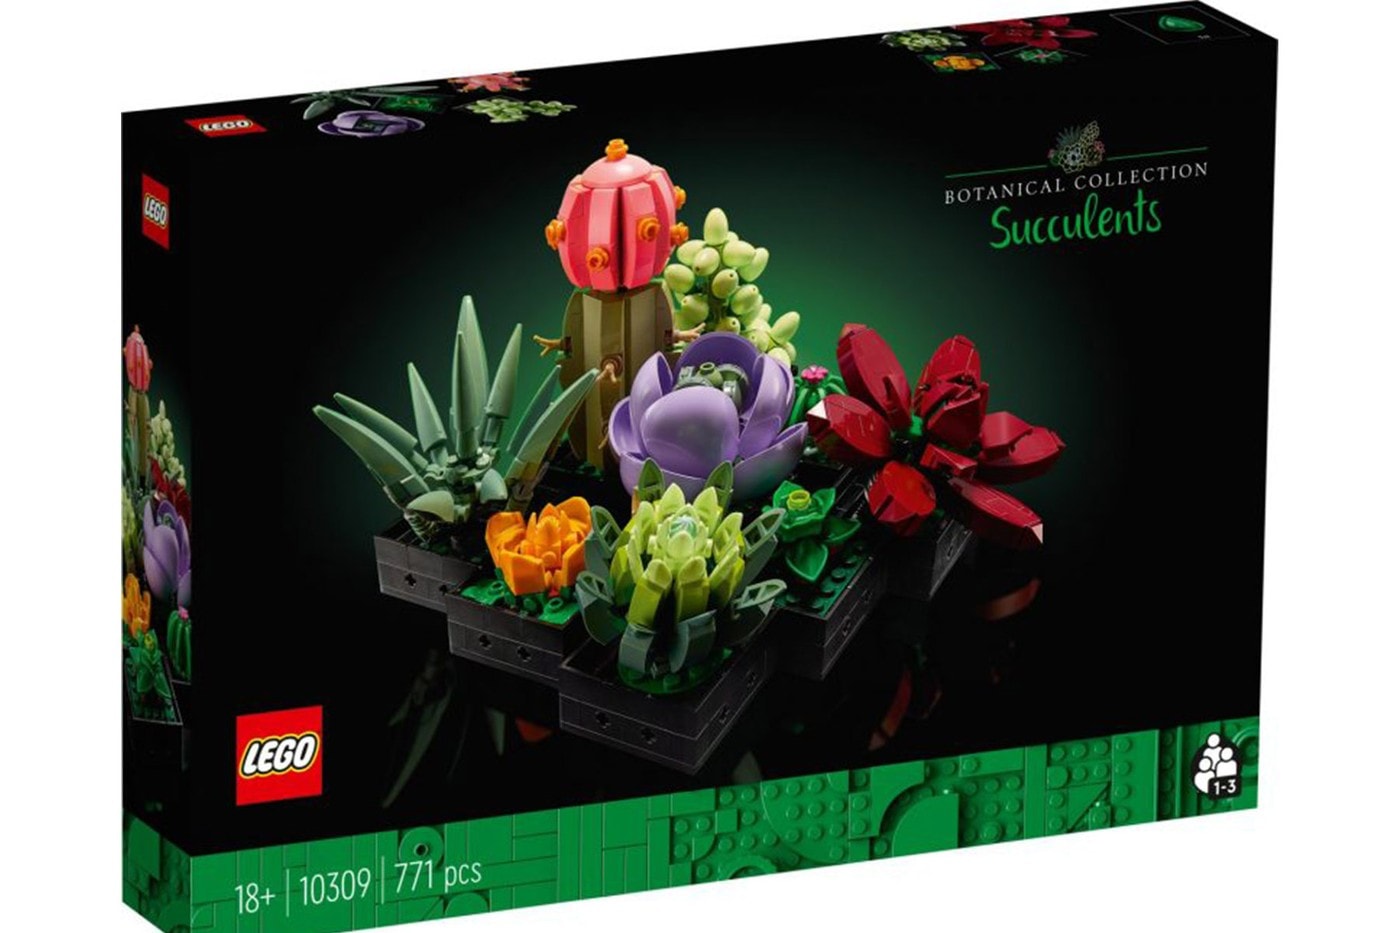 LEGO Creator Expert Botanical Collection Orchid Succulents Teaser